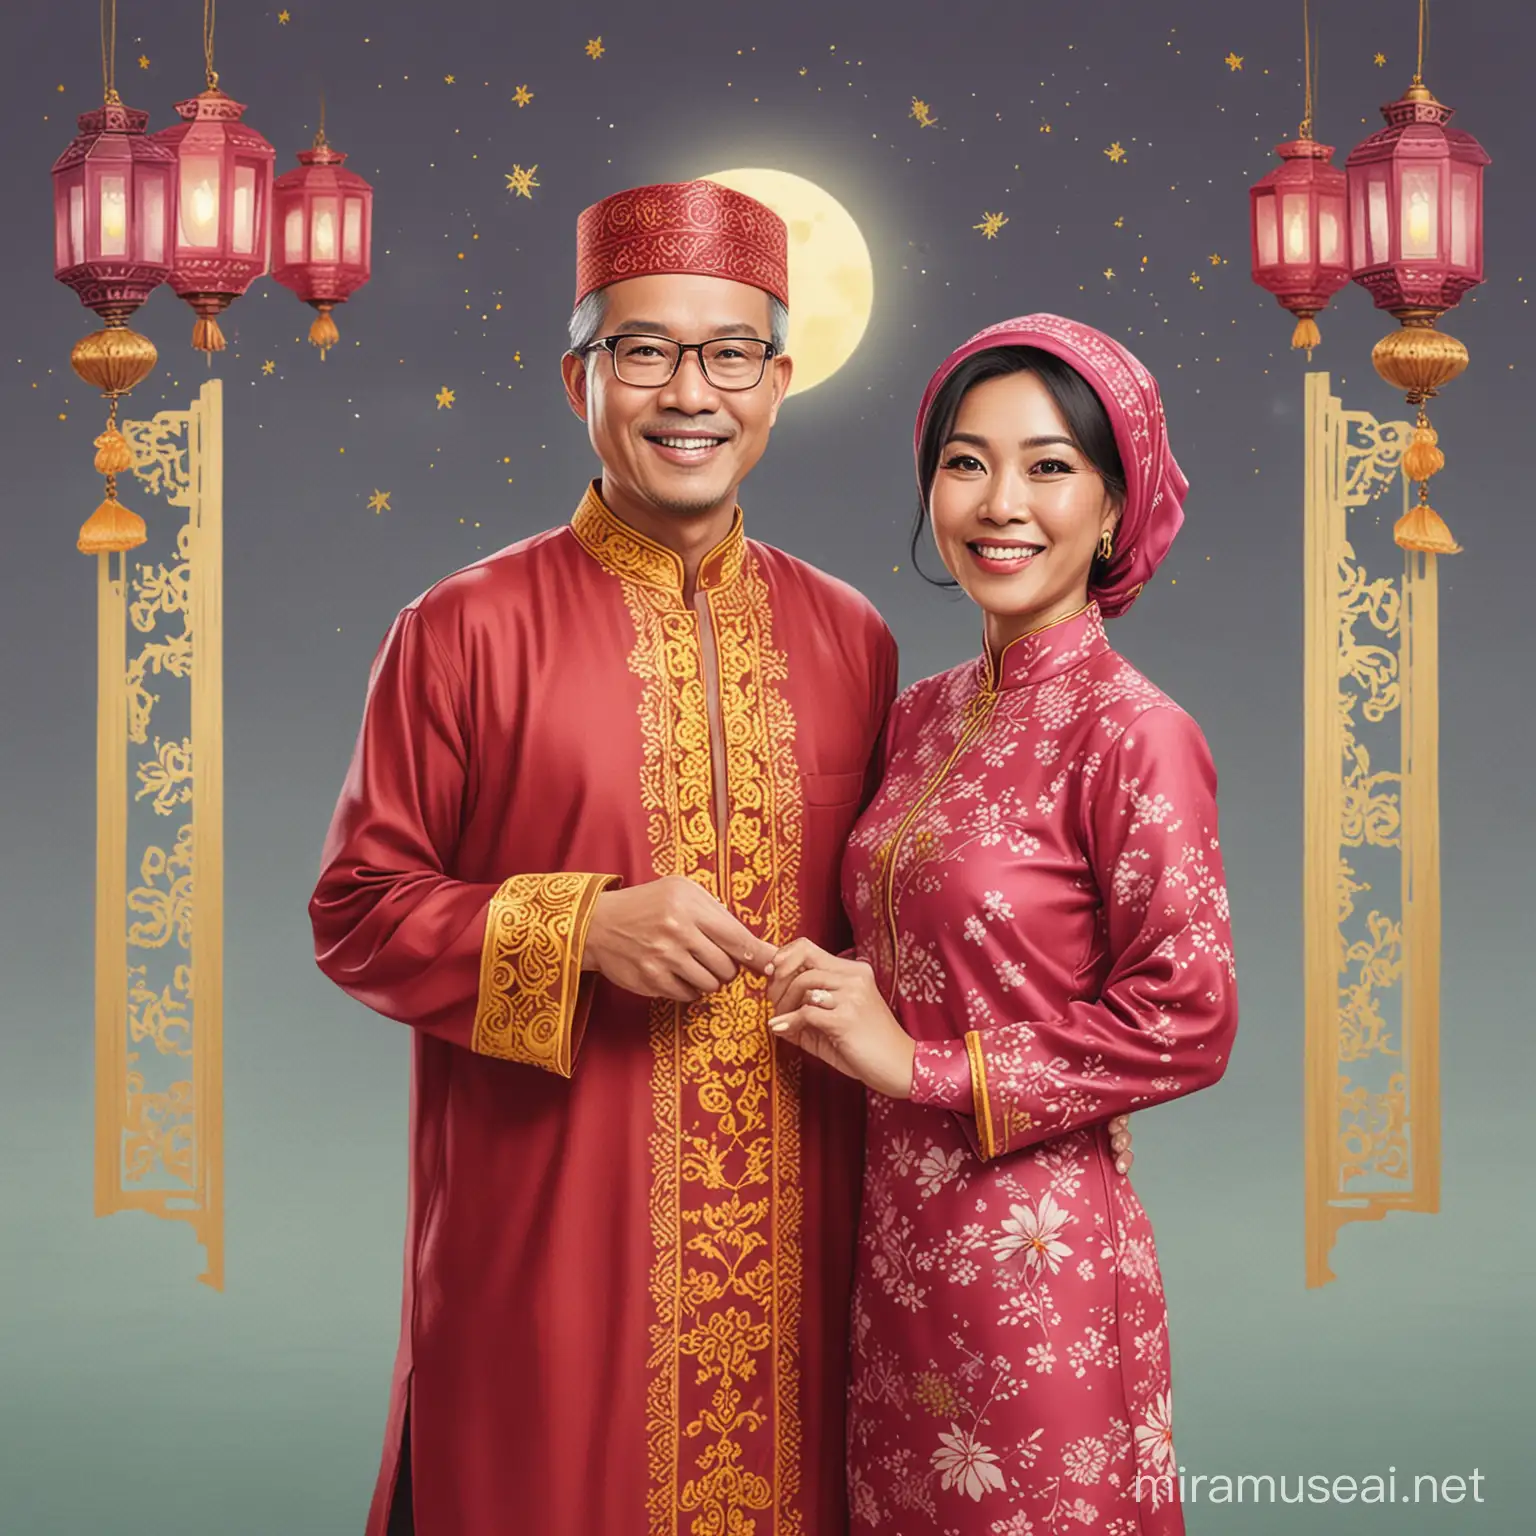 Malaysian Chinese Middleaged Couple Celebrating Eid alFitr in Traditional Malay Attire